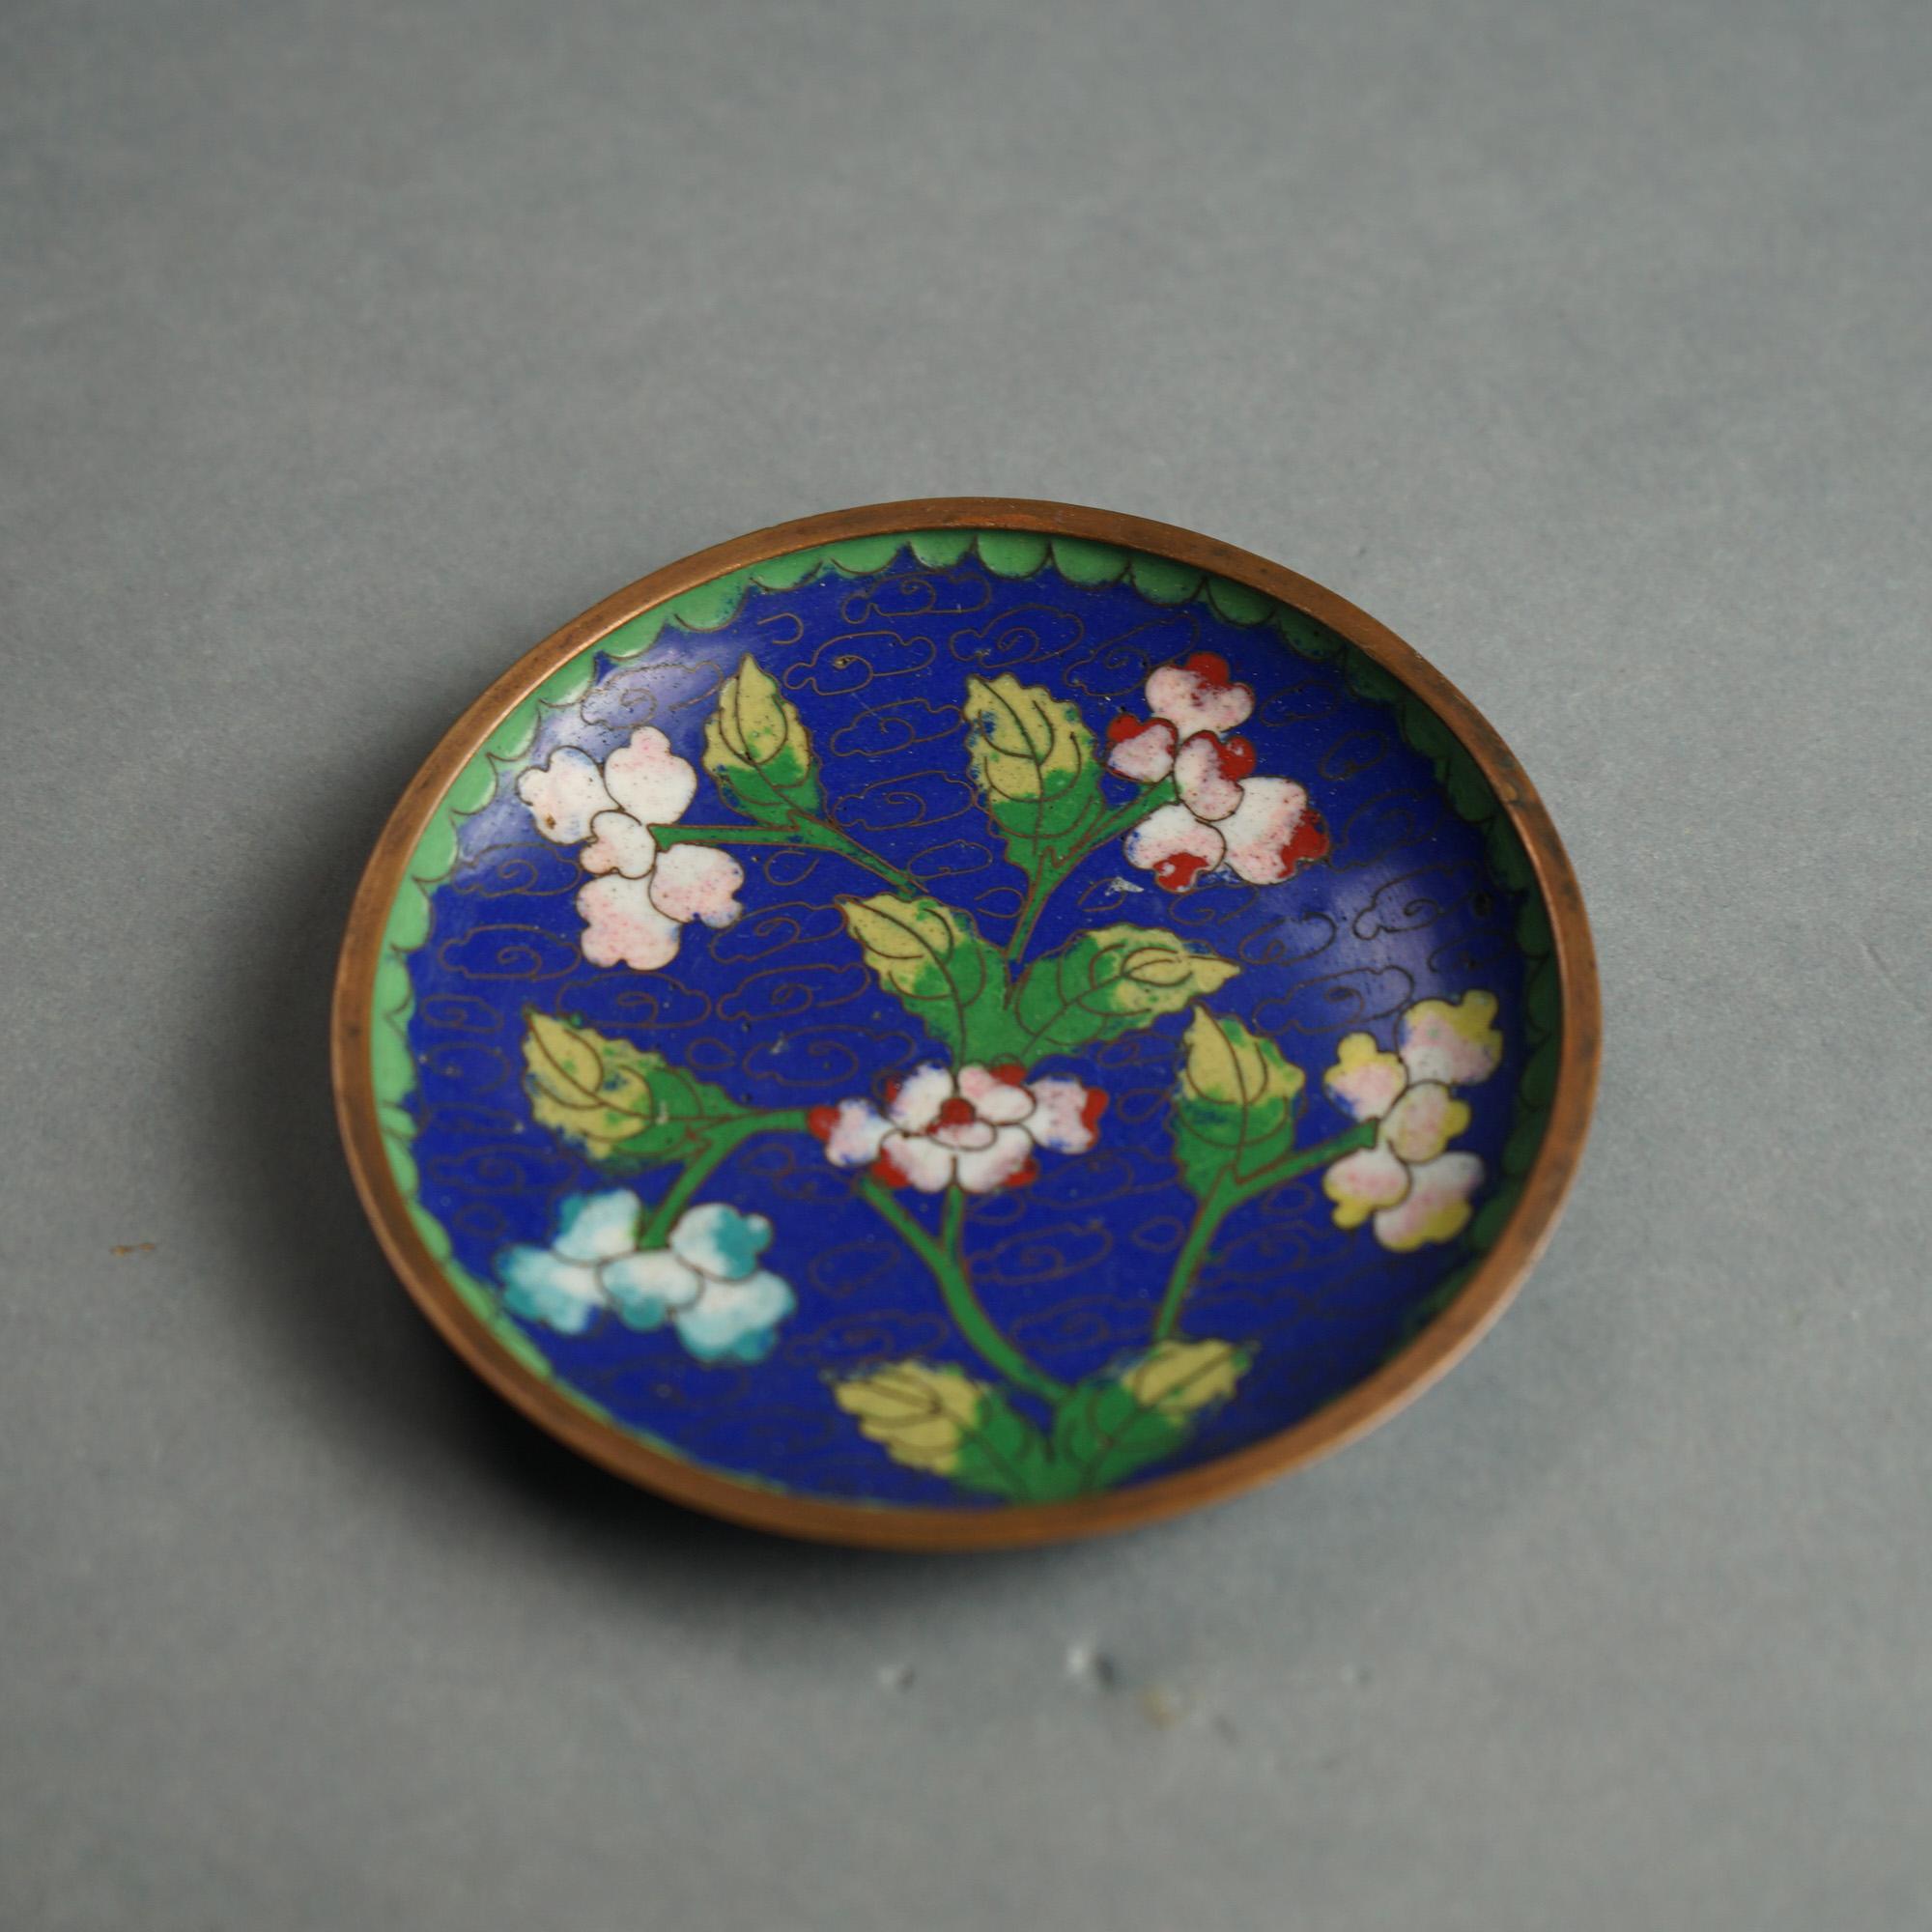 28 Antique Chinese Cloisonne Enameled Saucers & Ashtrays C1920 For Sale 3